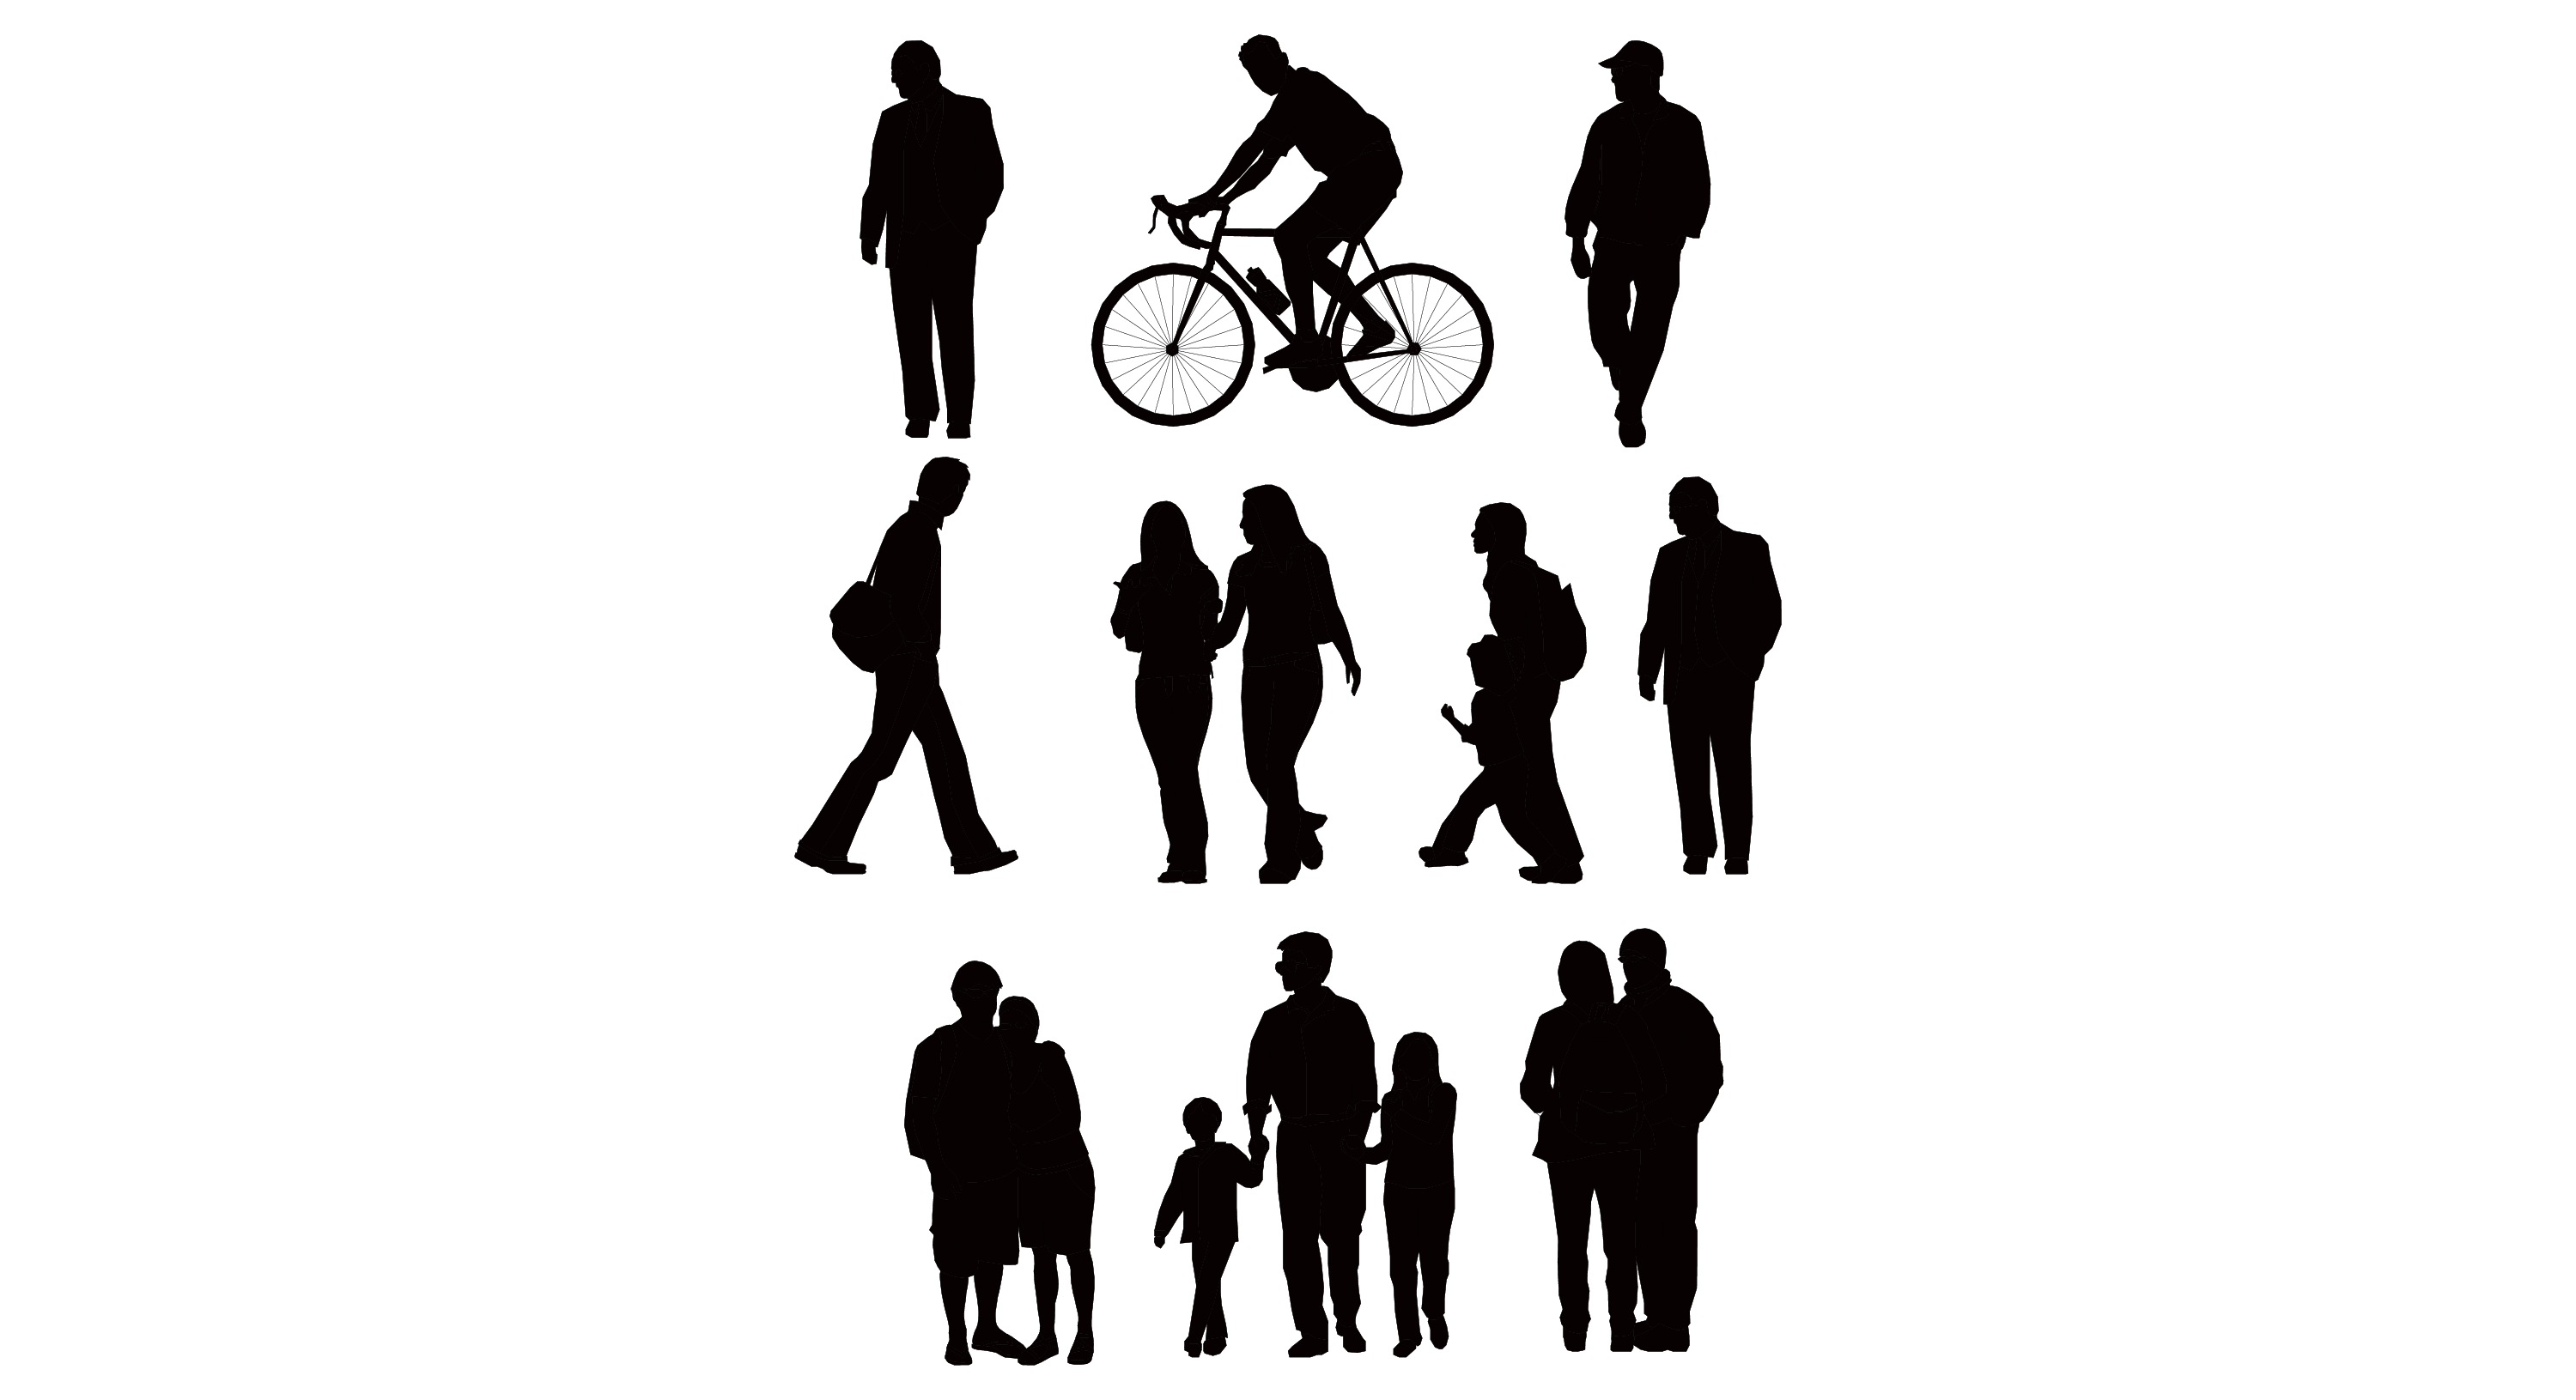 People Sitting Silhouettes 